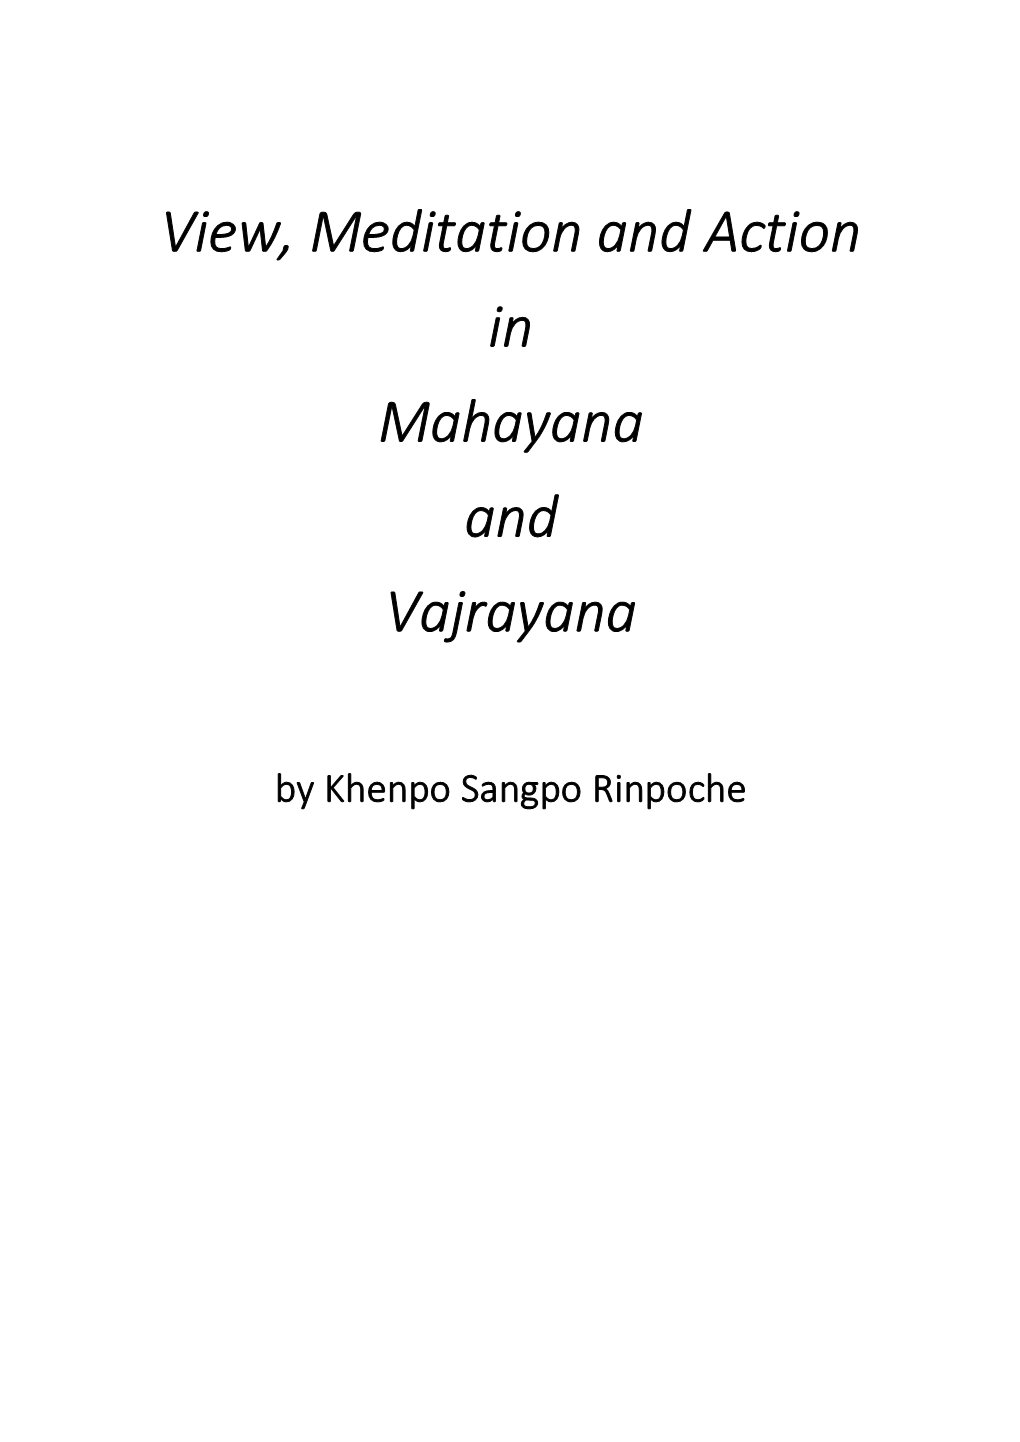 View, Meditation and Action in Mahayana and Vajrayana